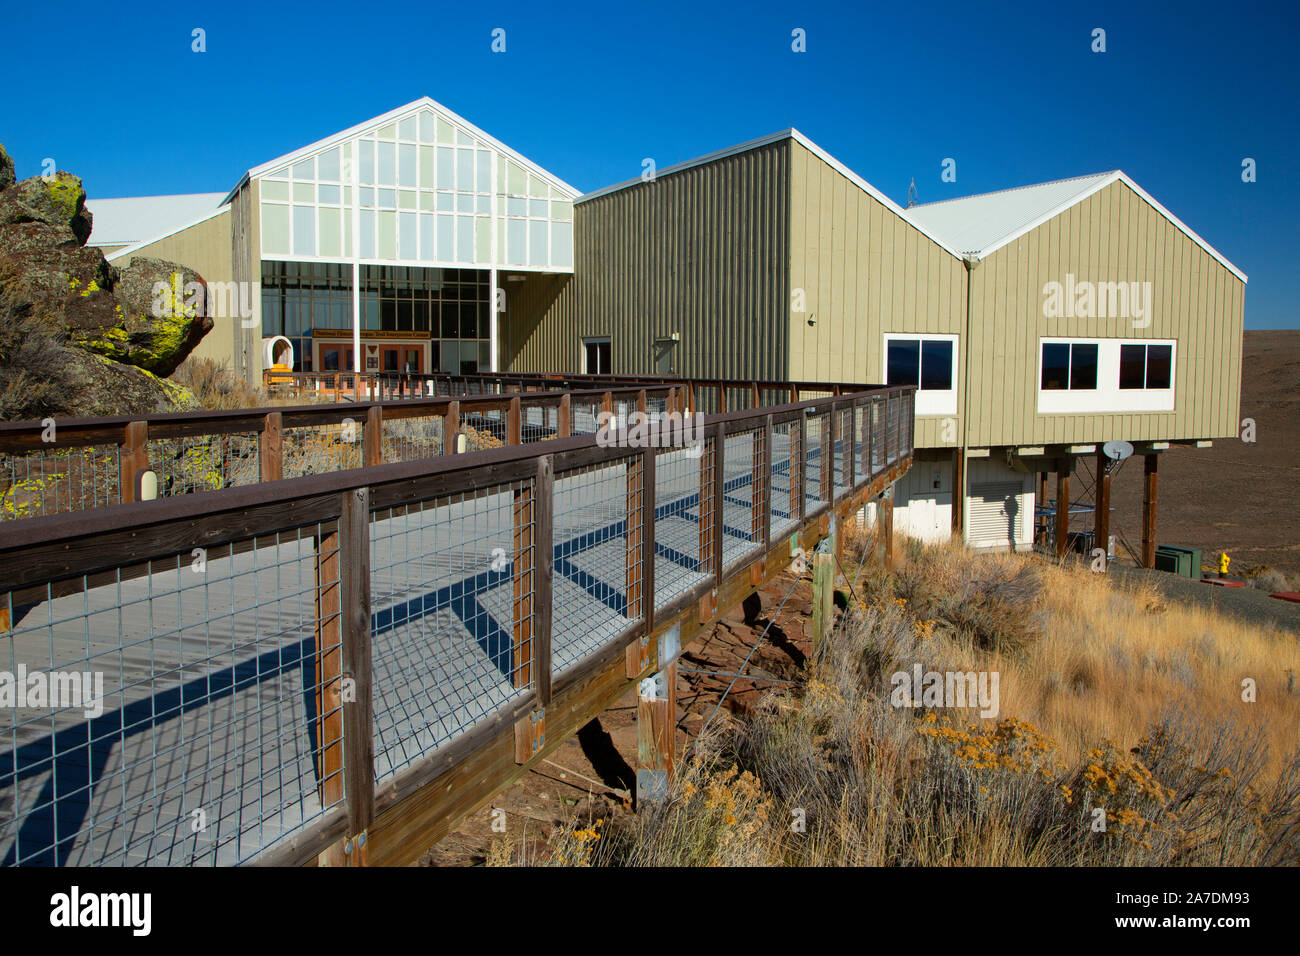 Visitor Centre, National Historic Oregon Trail Interpretive Center, Oregon Trail National Historic Trail, Hells Canyon National Scenic Byway, Oregon Stockfoto